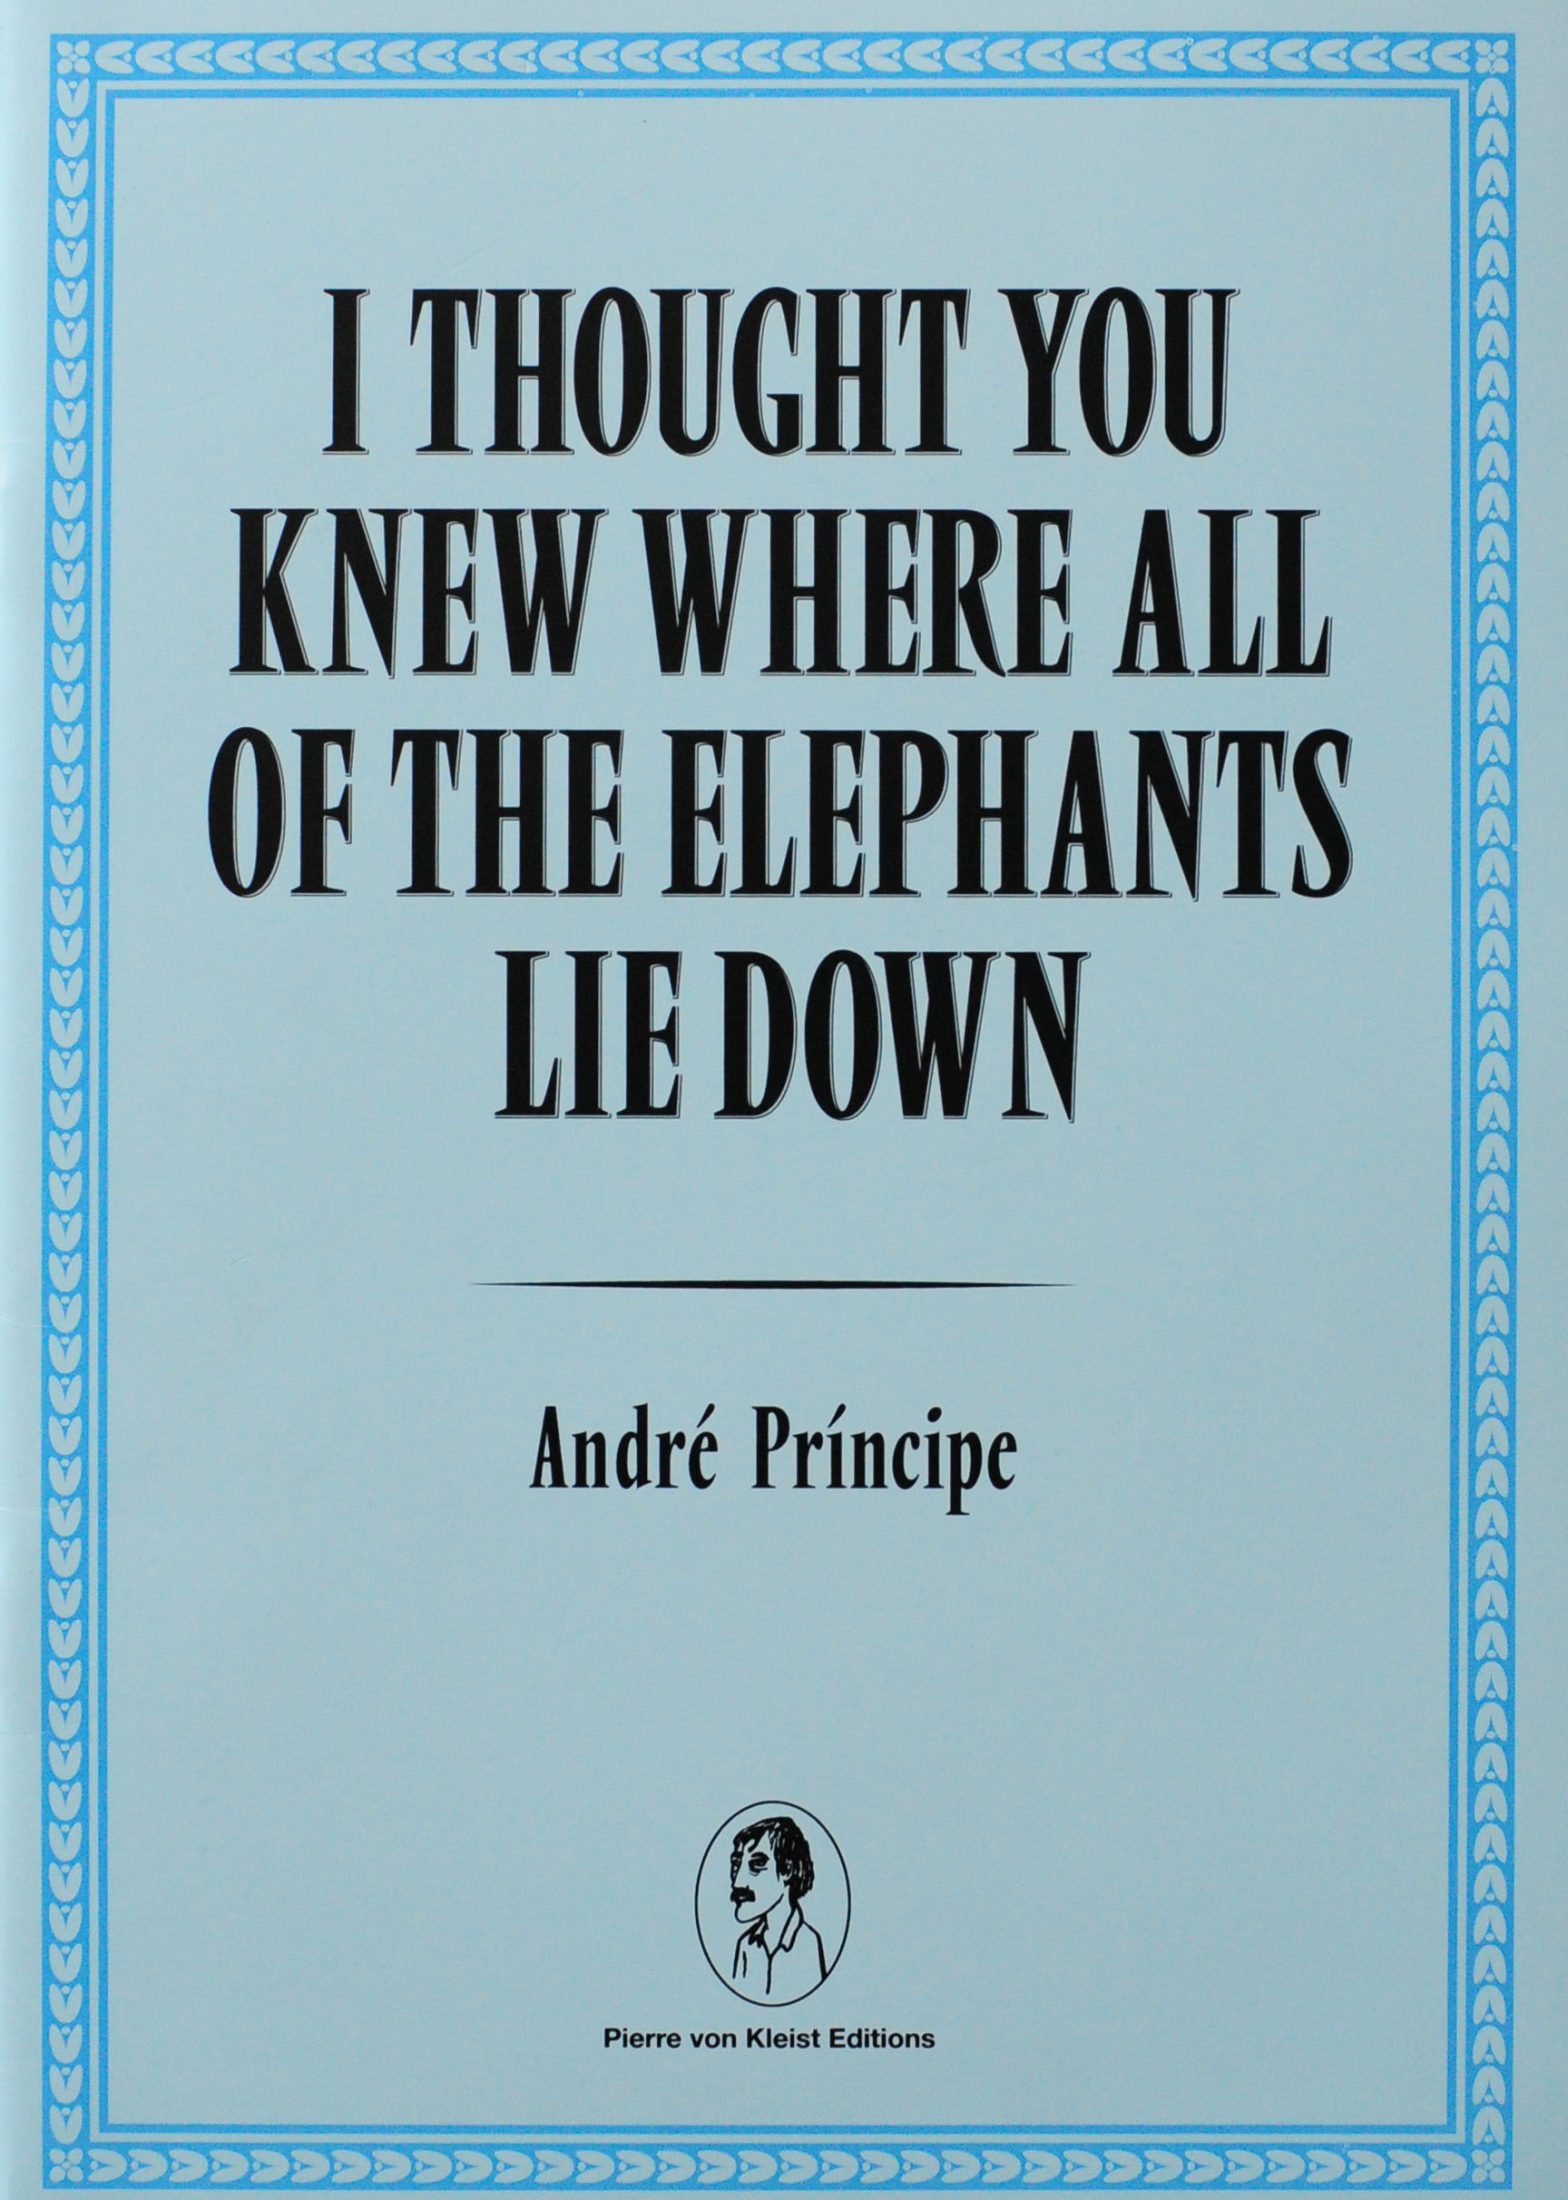 I Thought You Knew Where All Of The Elephants Lie Down, André Príncipe